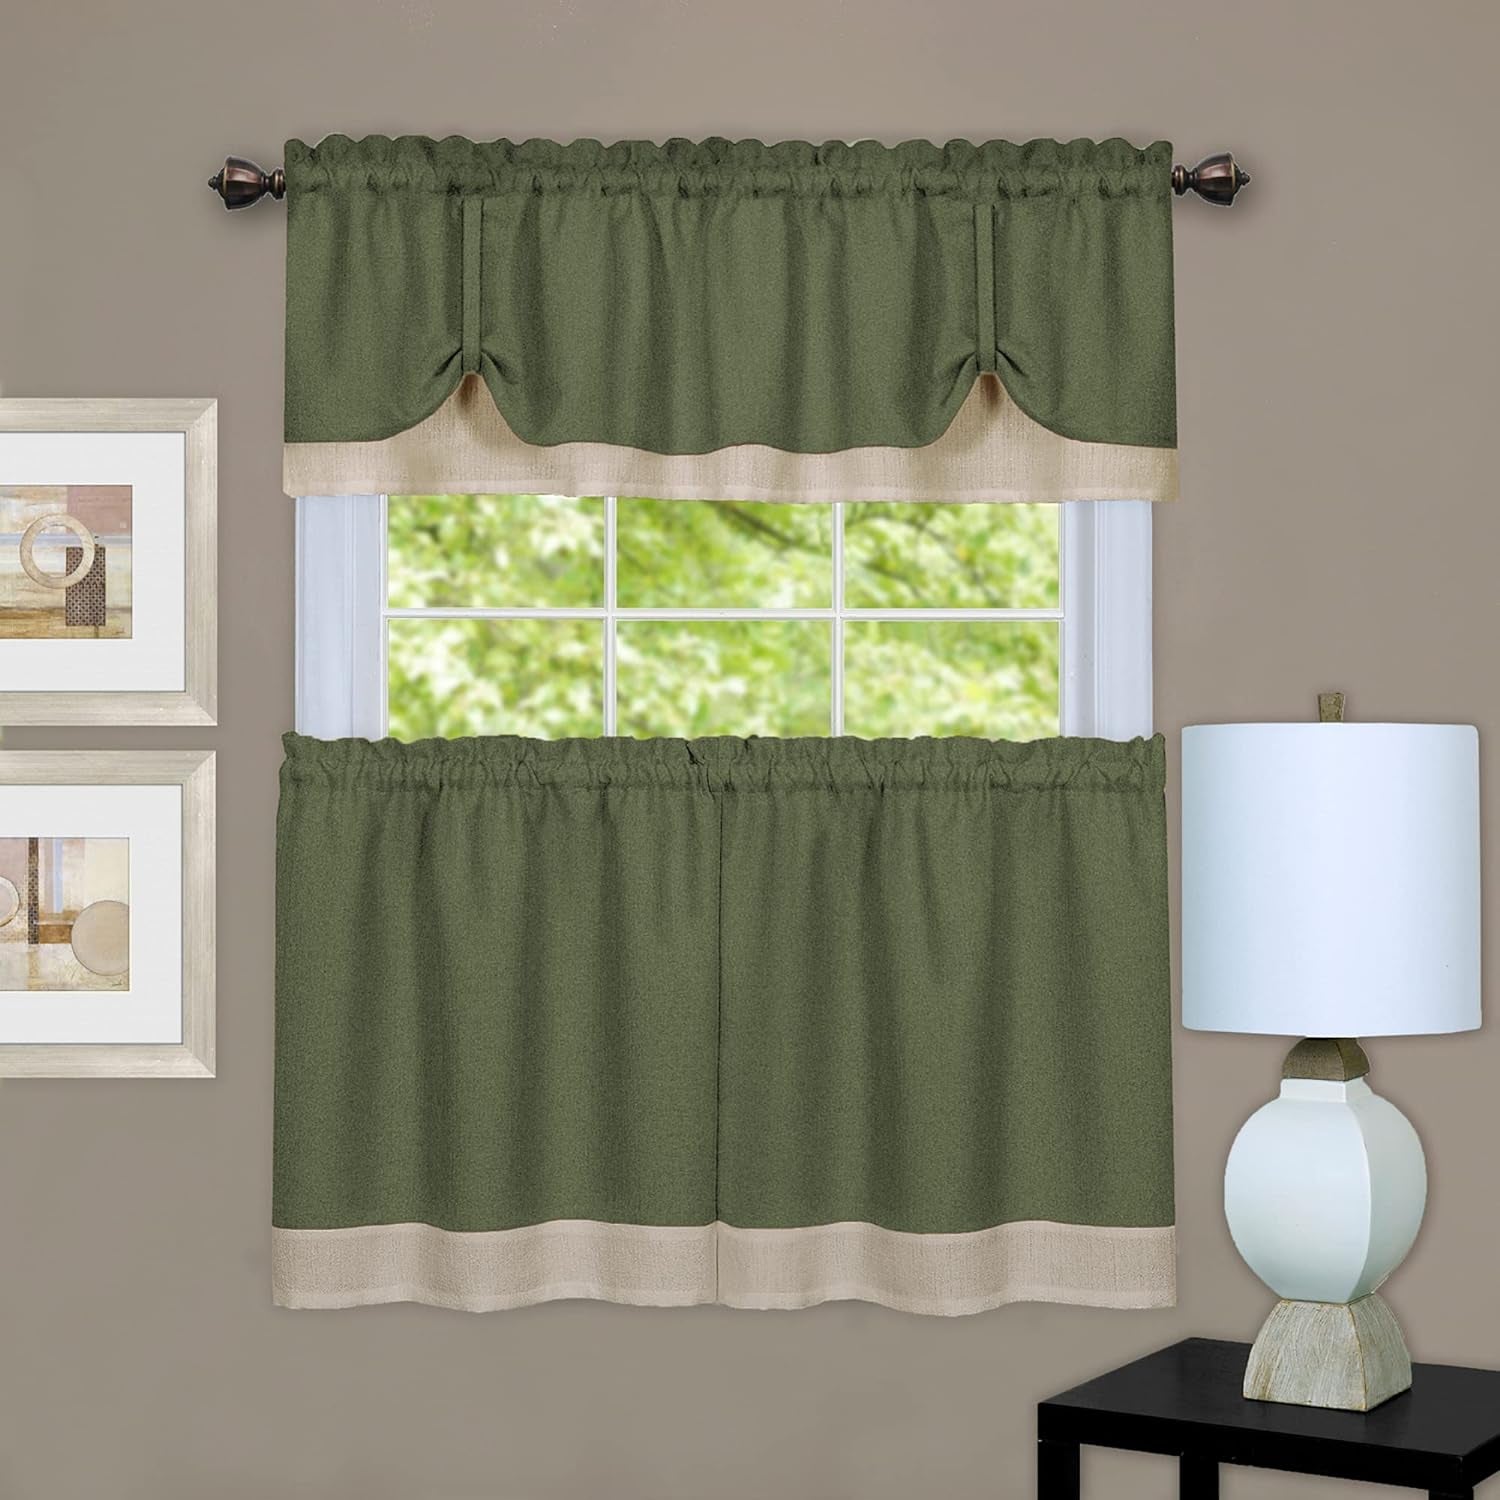 Darcy (Green/Camel) Tier and Valance Window Curtain Set - 58 Inch Width, 36 Inch Length - Light Filtering Drapes for Kitchen, Bedroom, Living & Dining Room by Achim Home Decor